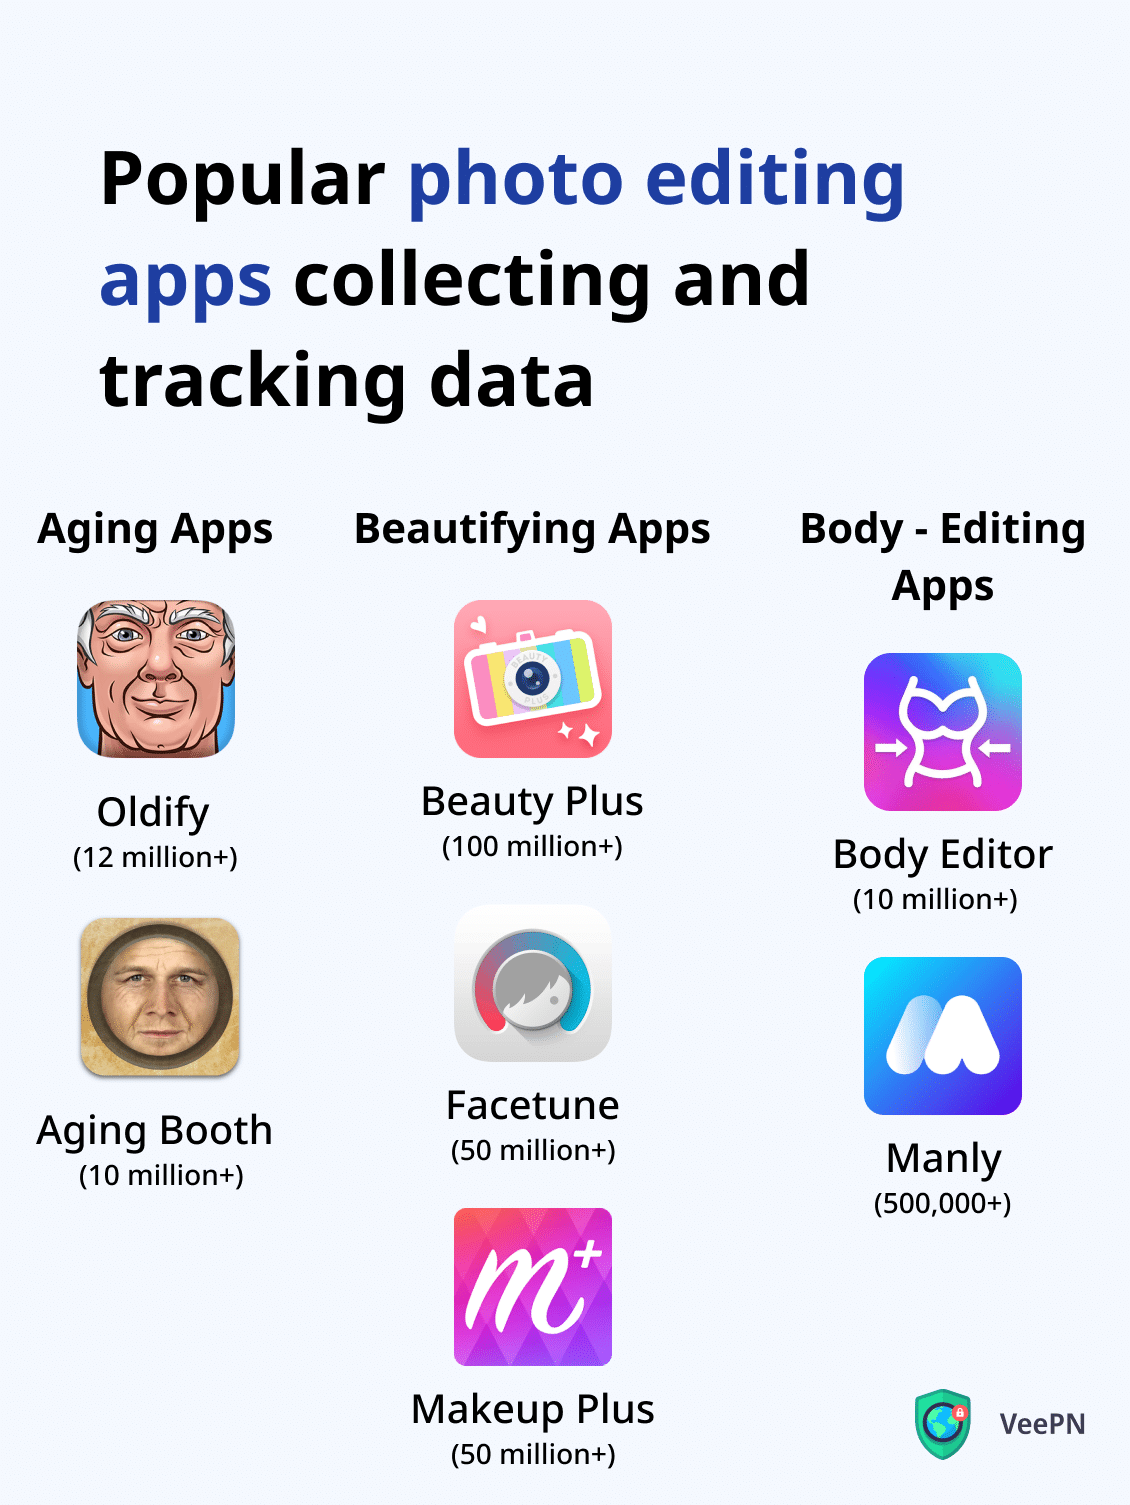 Popular photo editing apps that collect and track your data